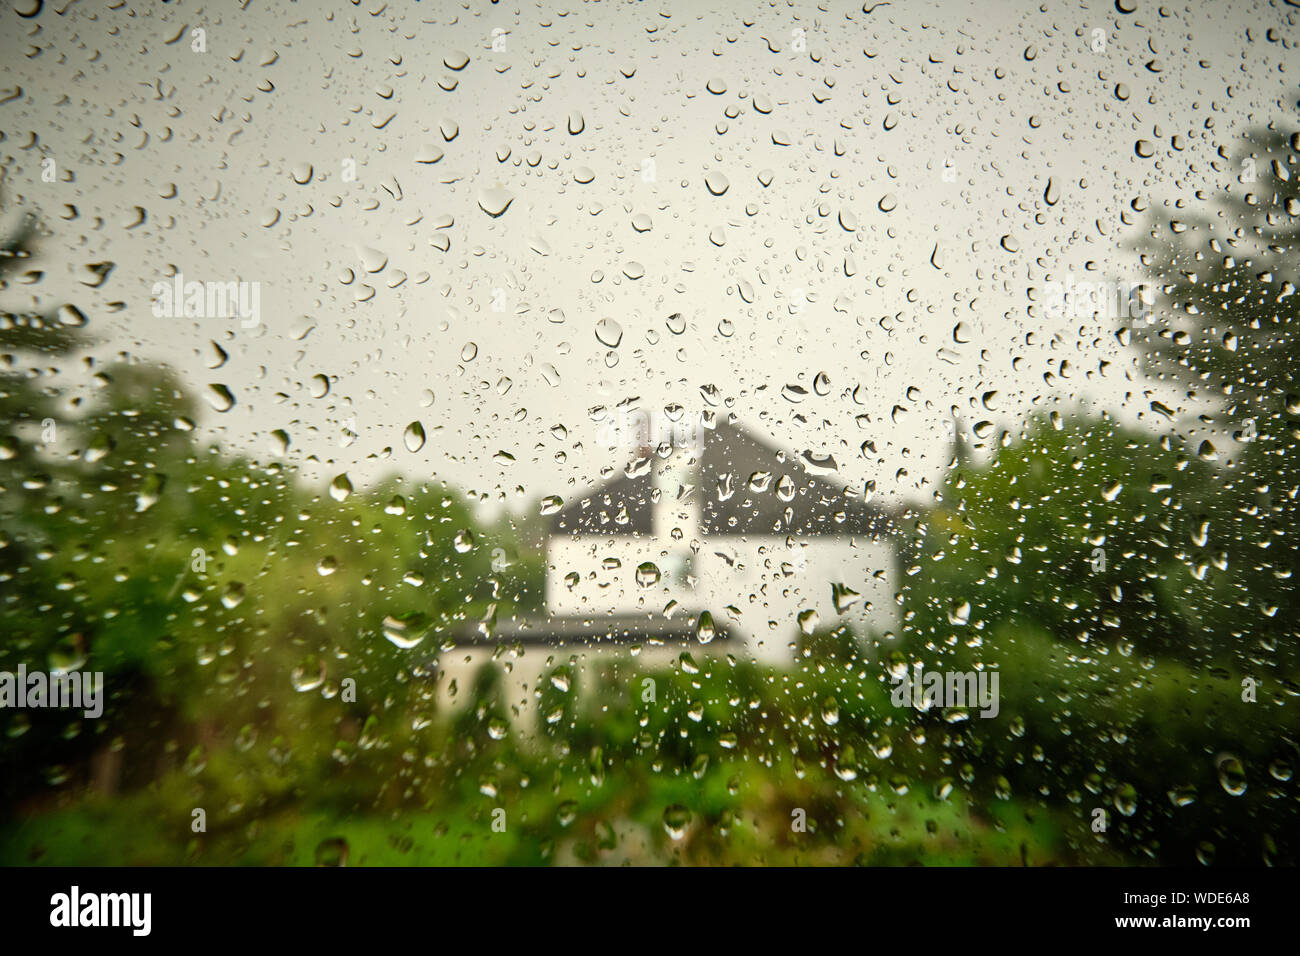 Moody and melancholic view out of a window into a garden with a house with rain drops on a rainy summer day Stock Photo